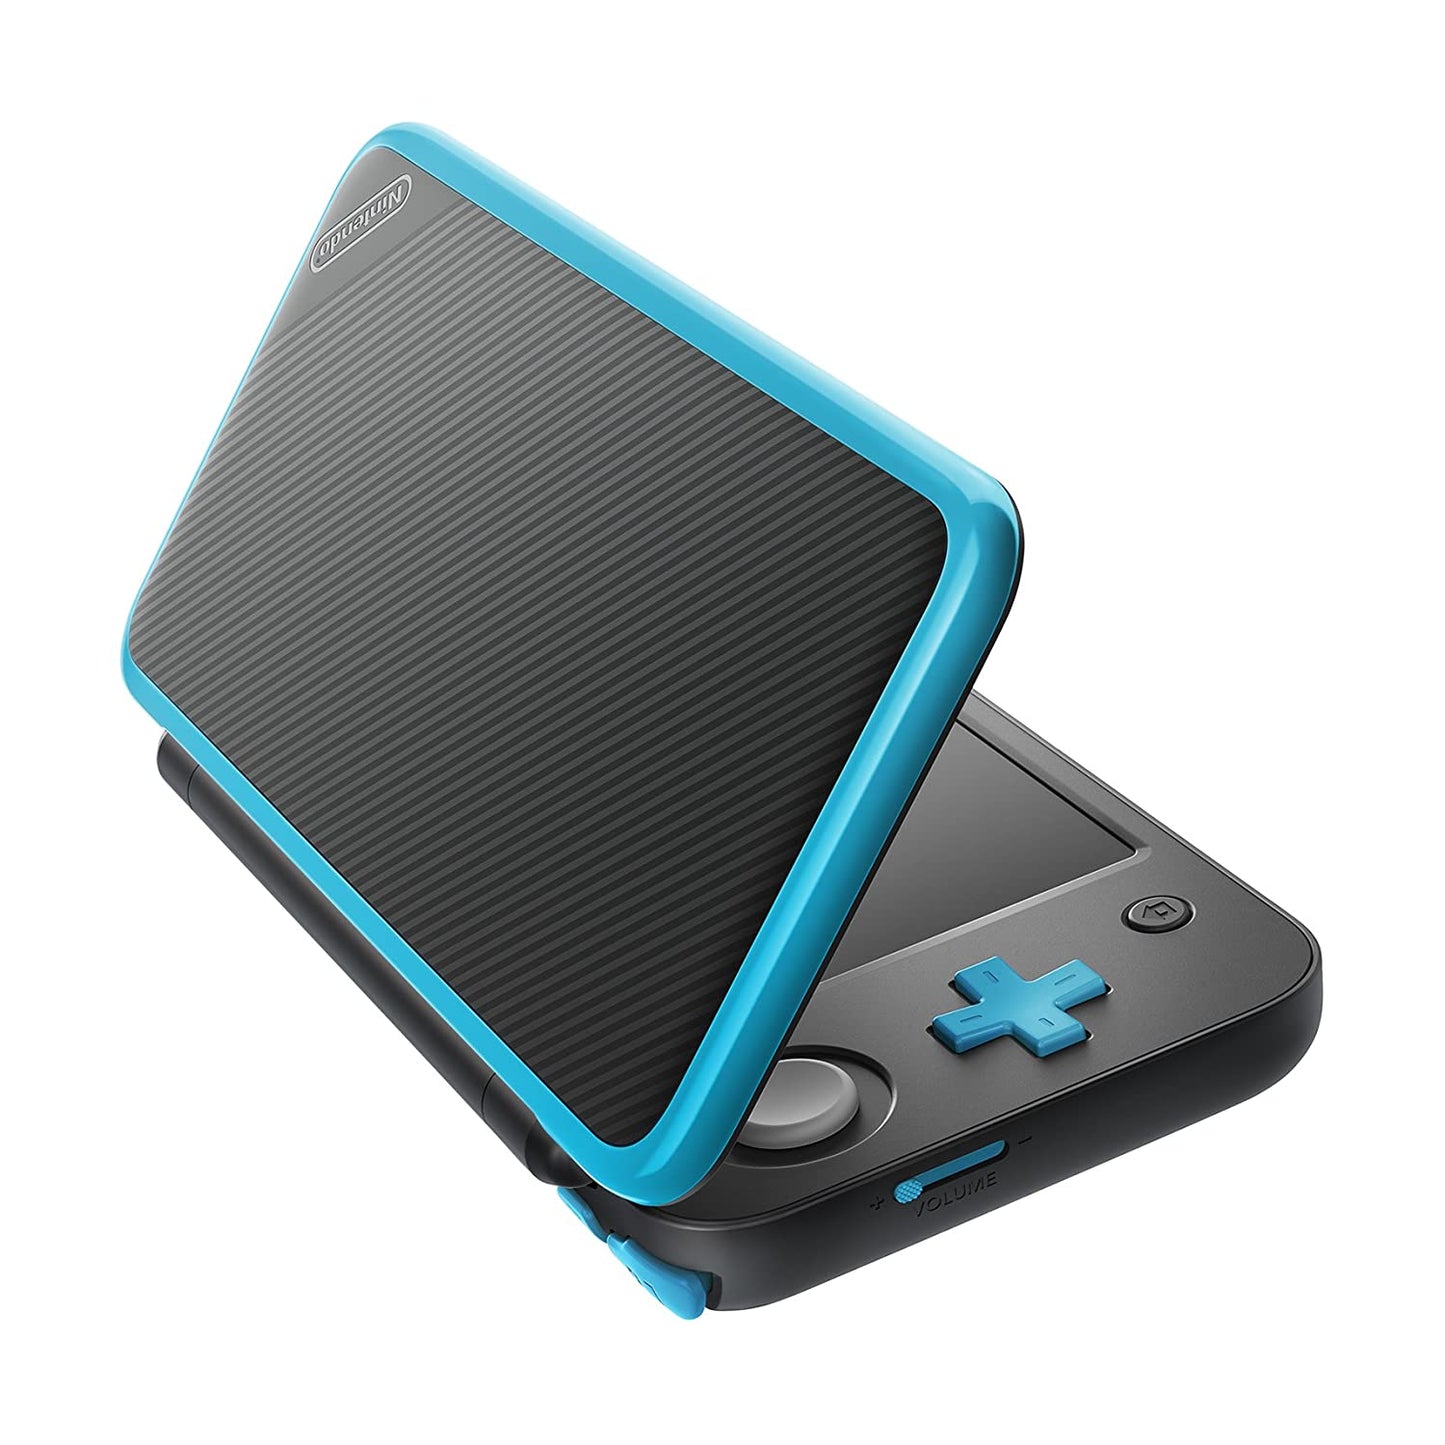 Nintendo 2DS XL: Black and Turquoise